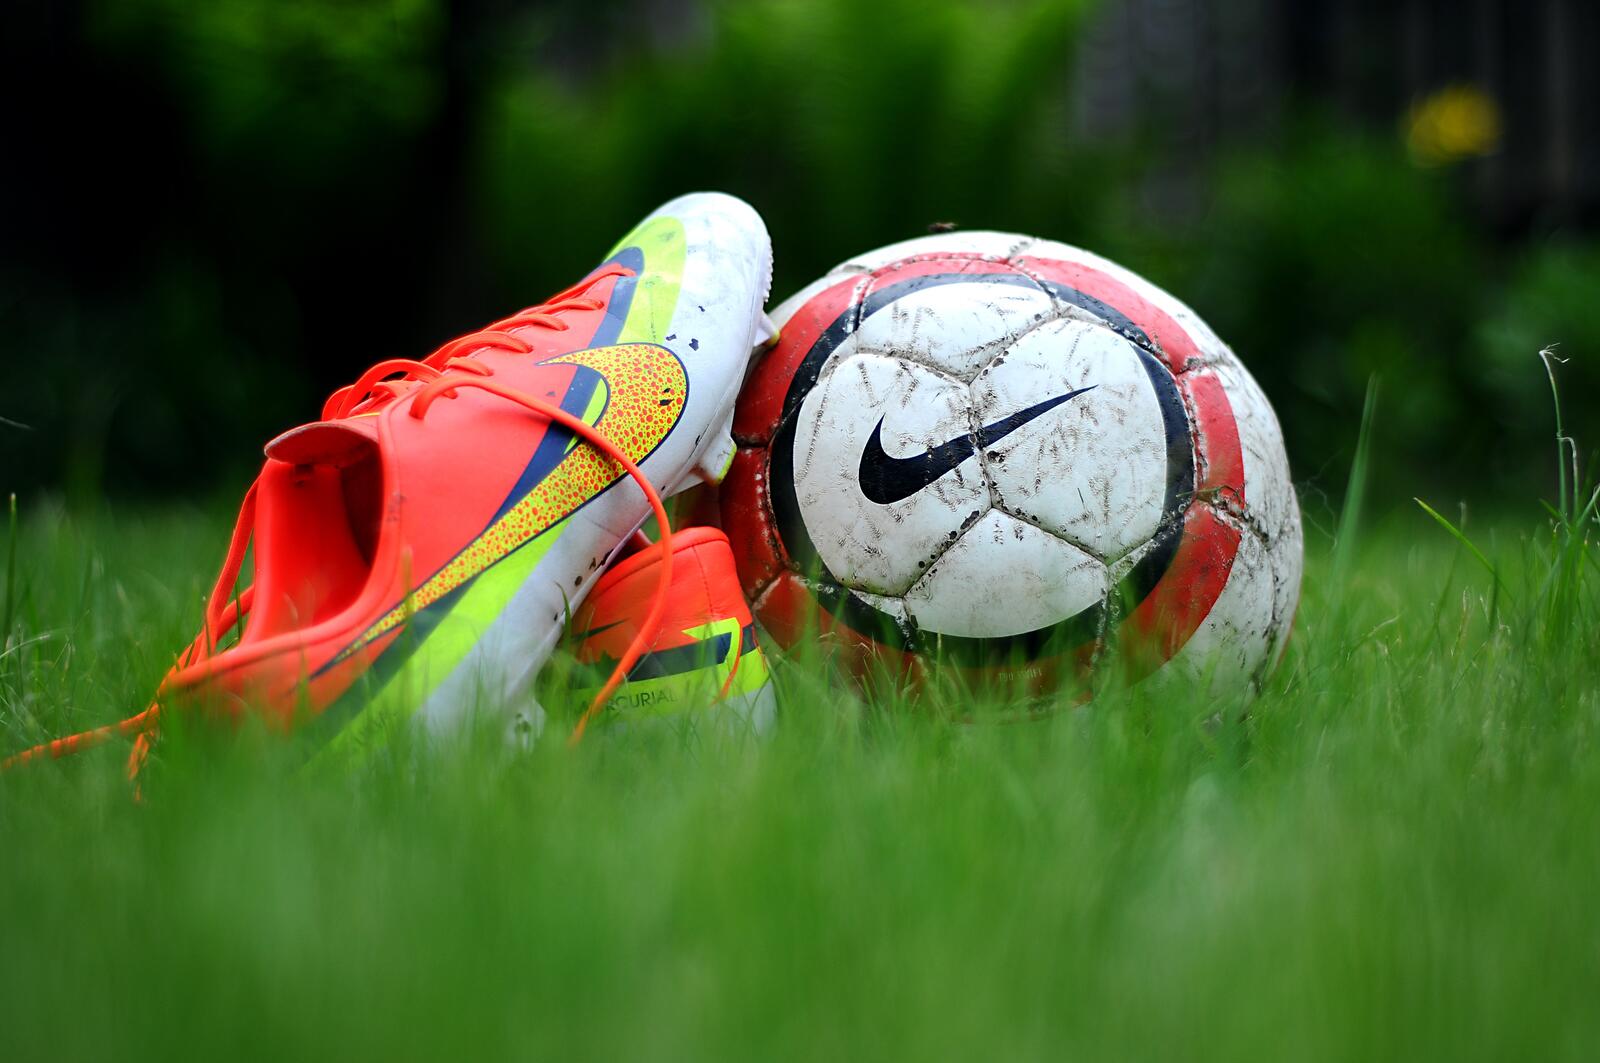 Free photo A soccer ball with cleats on a soccer field